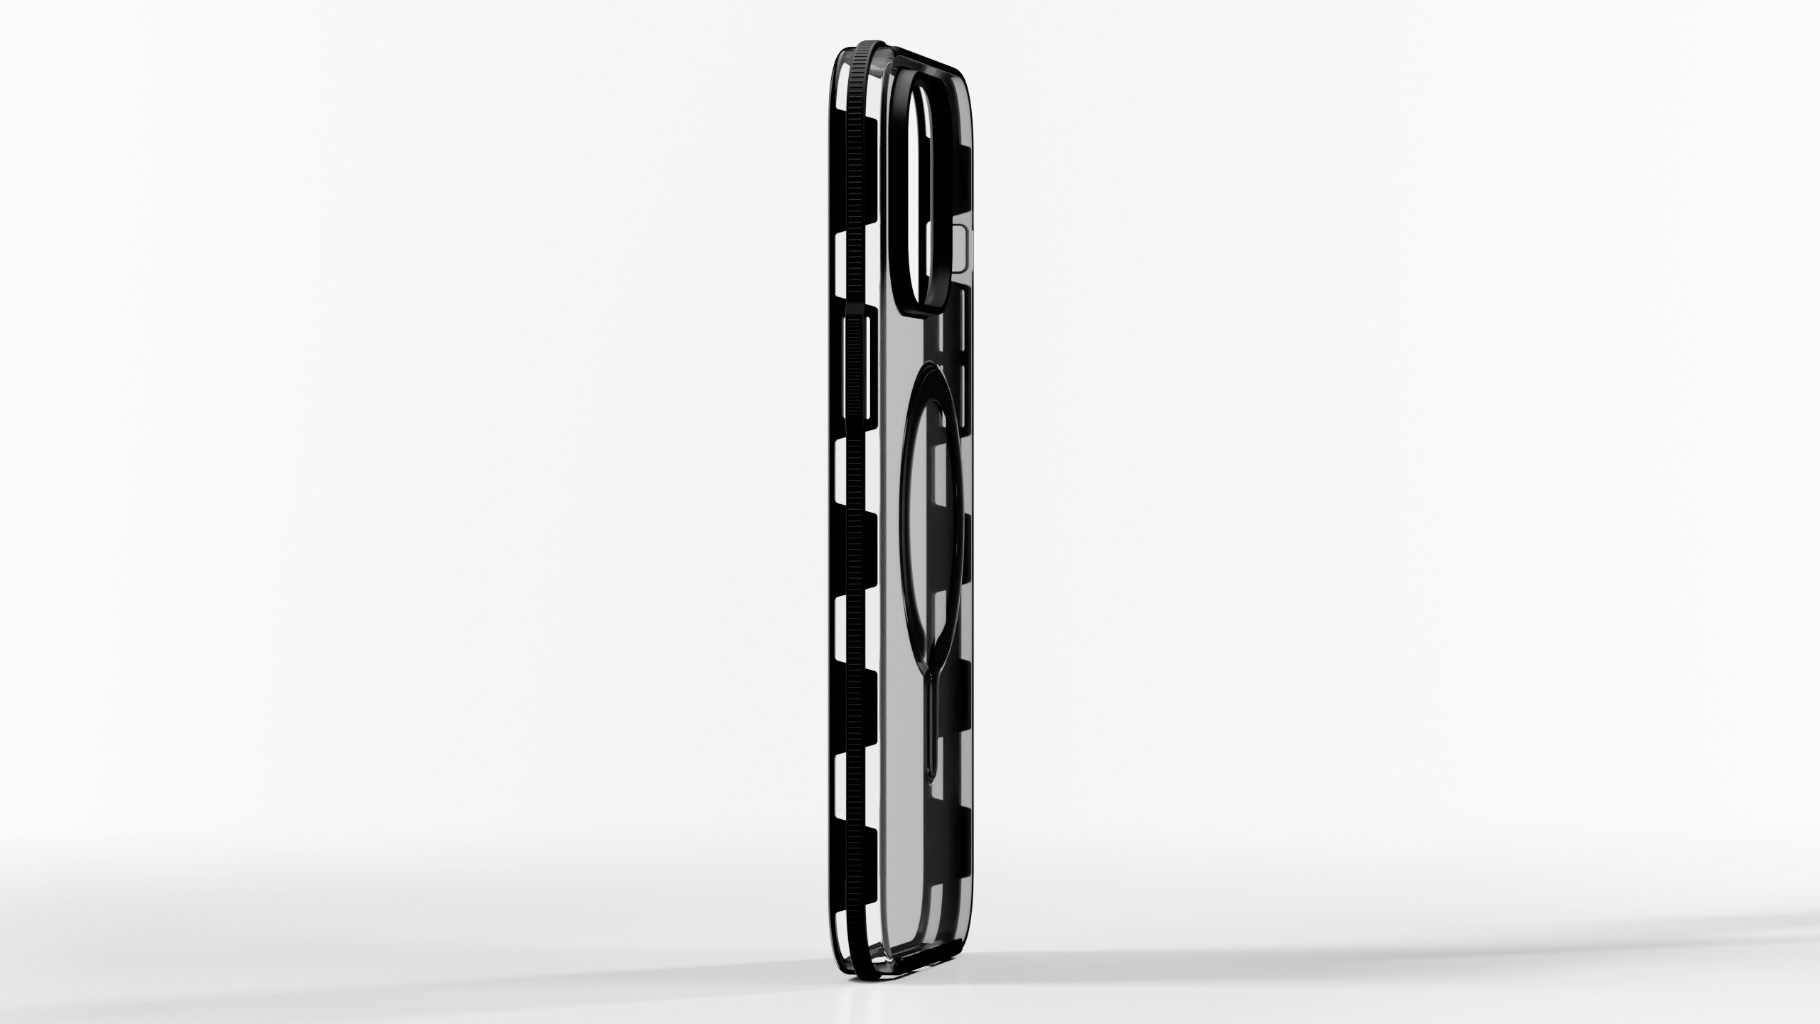 Ghost case and skin on iPhone 14 Pro Max : r/dbrand